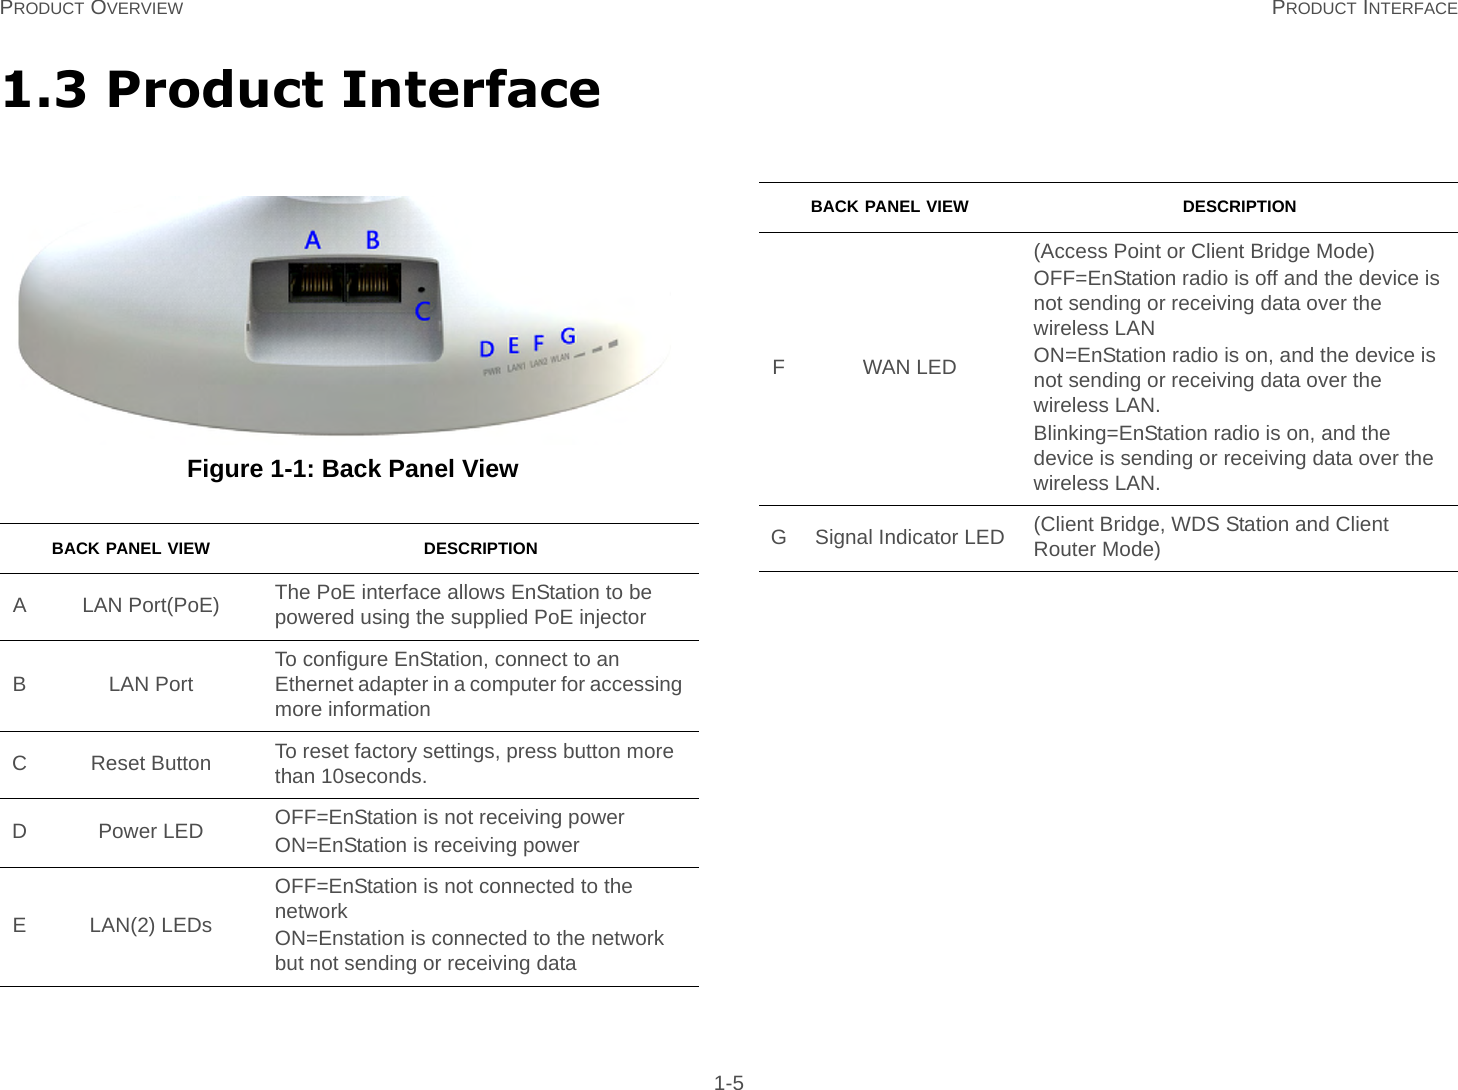 PRODUCT OVERVIEW PRODUCT INTERFACE 1-51.3 Product Interface Figure 1-1: Back Panel ViewBACK PANEL VIEW DESCRIPTIONALAN Port(PoE)The PoE interface allows EnStation to be powered using the supplied PoE injectorB LAN Port To configure EnStation, connect to an Ethernet adapter in a computer for accessing more informationC Reset Button To reset factory settings, press button more than 10seconds.D Power LED OFF=EnStation is not receiving powerON=EnStation is receiving power E LAN(2) LEDsOFF=EnStation is not connected to the networkON=Enstation is connected to the network but not sending or receiving dataFWAN LED(Access Point or Client Bridge Mode)OFF=EnStation radio is off and the device is not sending or receiving data over the wireless LANON=EnStation radio is on, and the device is not sending or receiving data over the wireless LAN.Blinking=EnStation radio is on, and the device is sending or receiving data over the wireless LAN.G Signal Indicator LED (Client Bridge, WDS Station and Client Router Mode)BACK PANEL VIEW DESCRIPTION